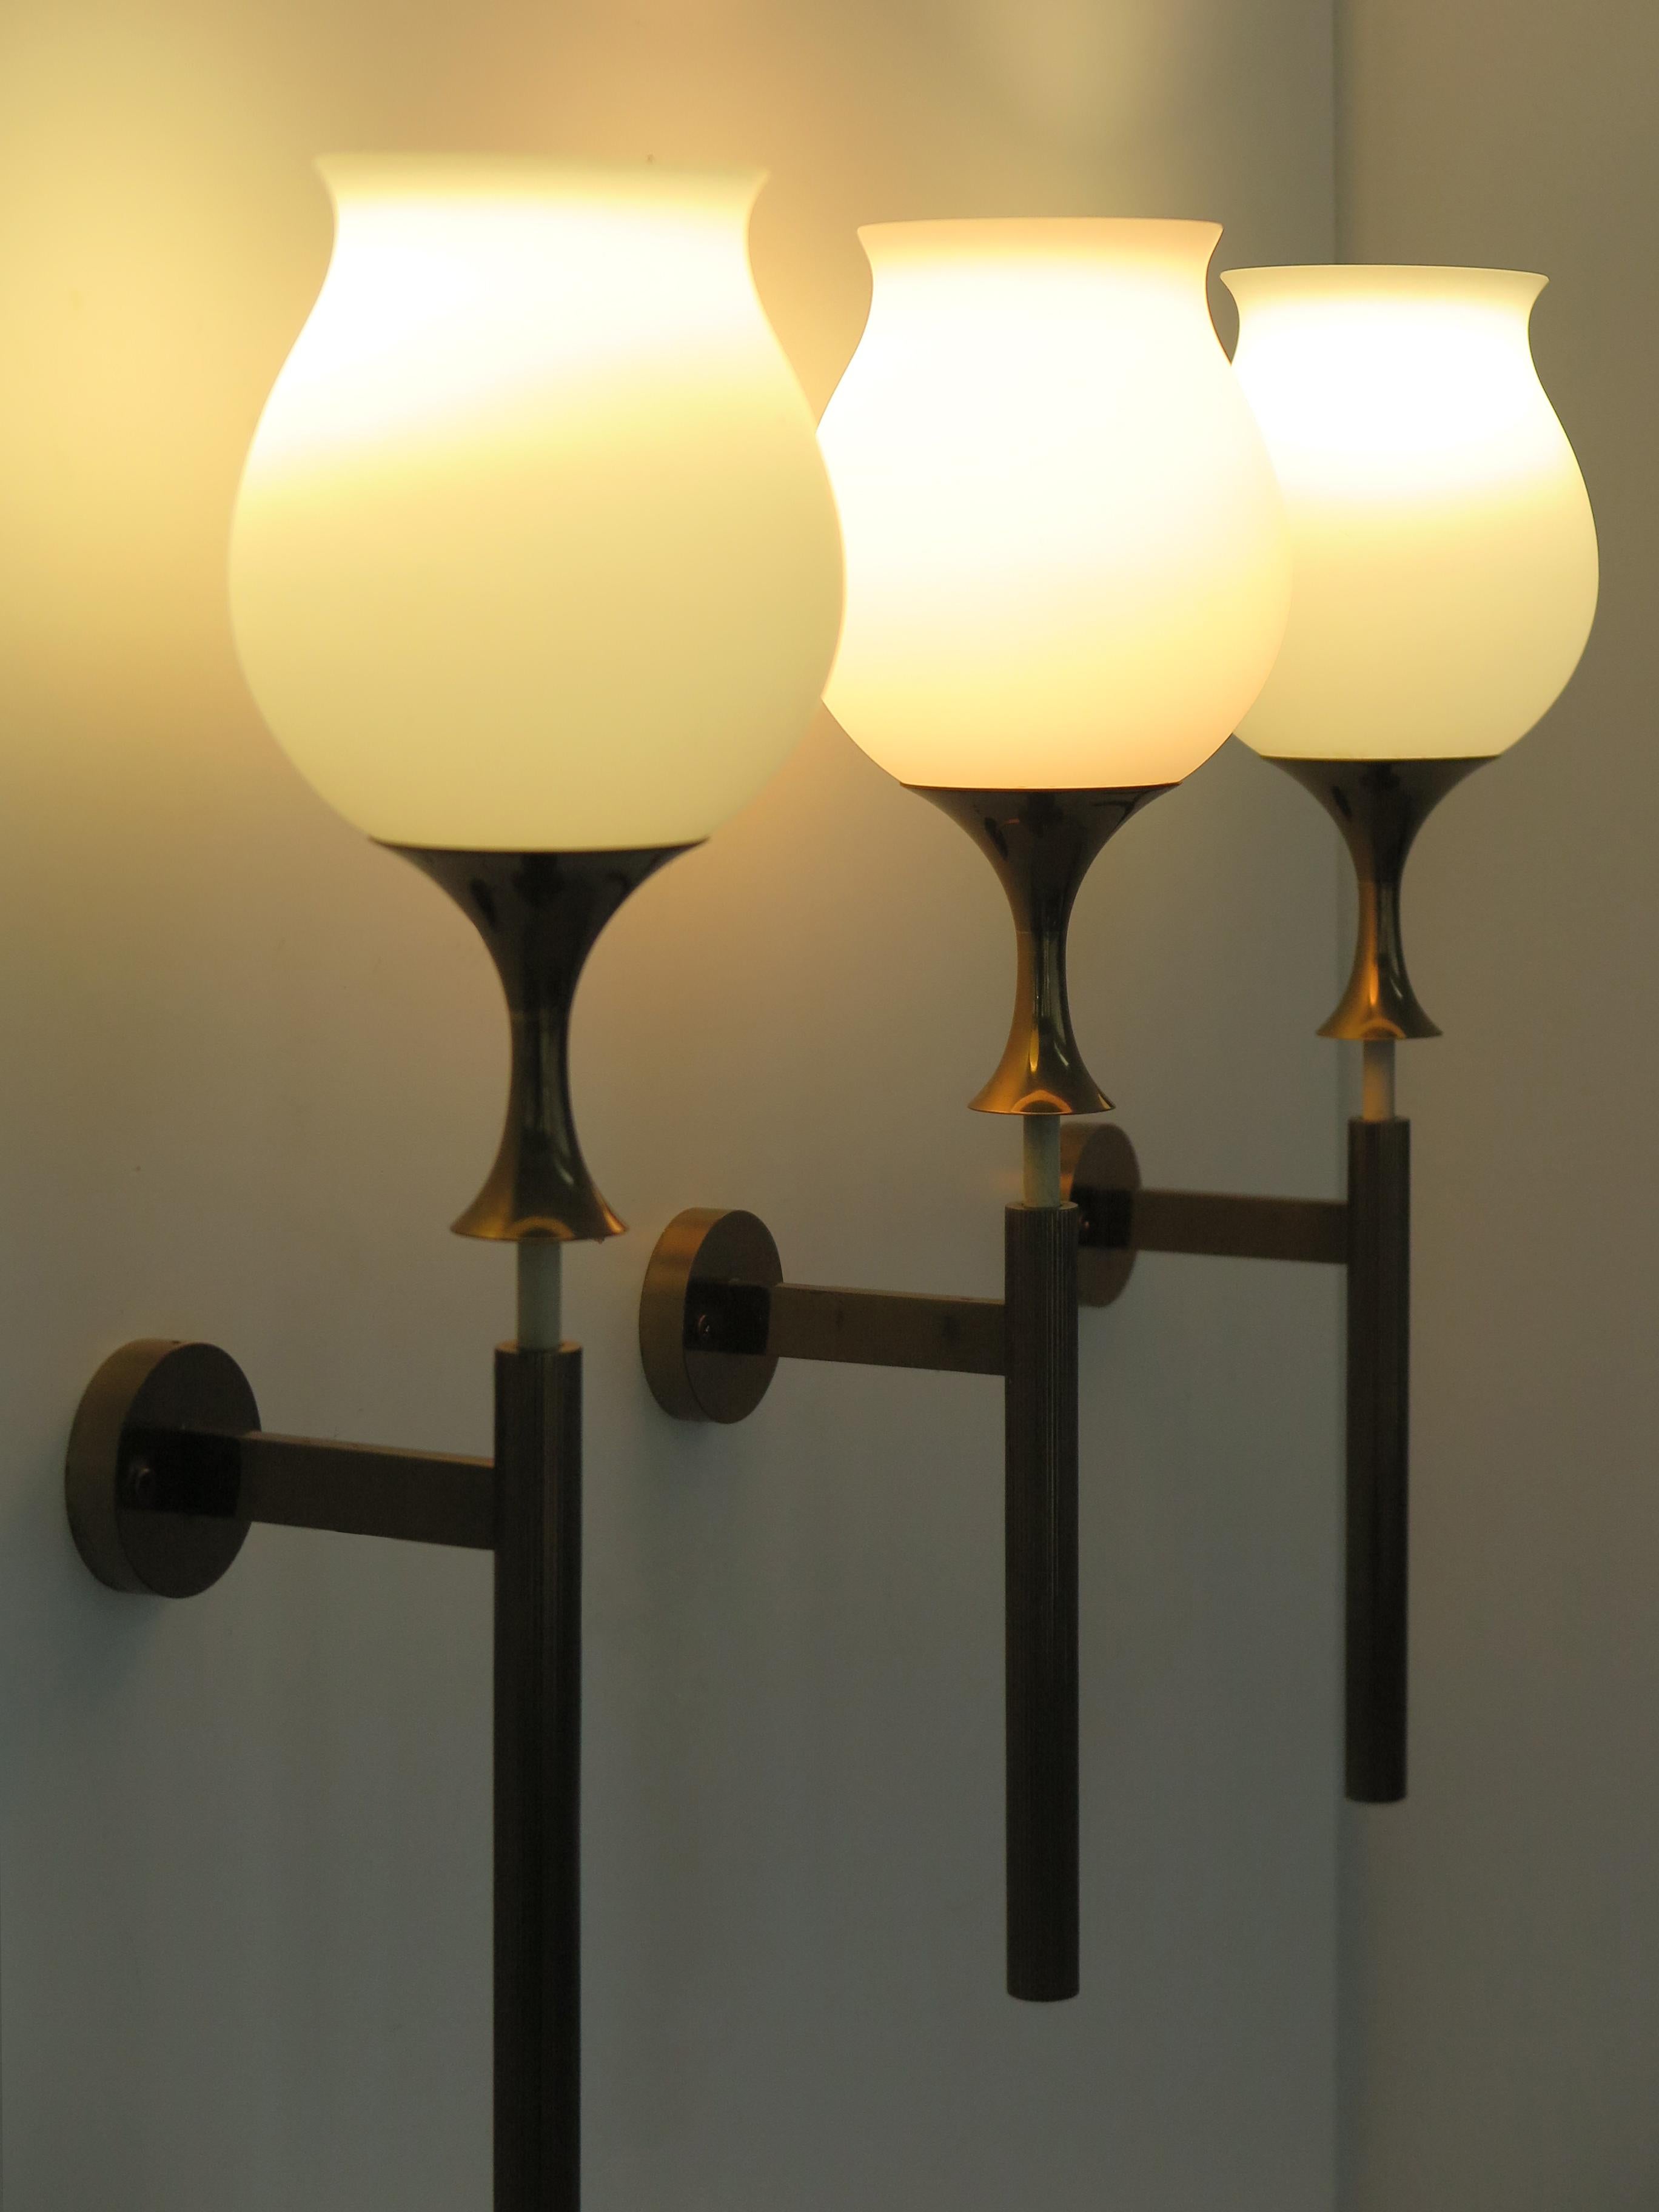 Angelo Lelii Italian Midcentury Glass Brass Sconces Wall Lamps Arredoluce 1950s In Good Condition For Sale In Reggio Emilia, IT